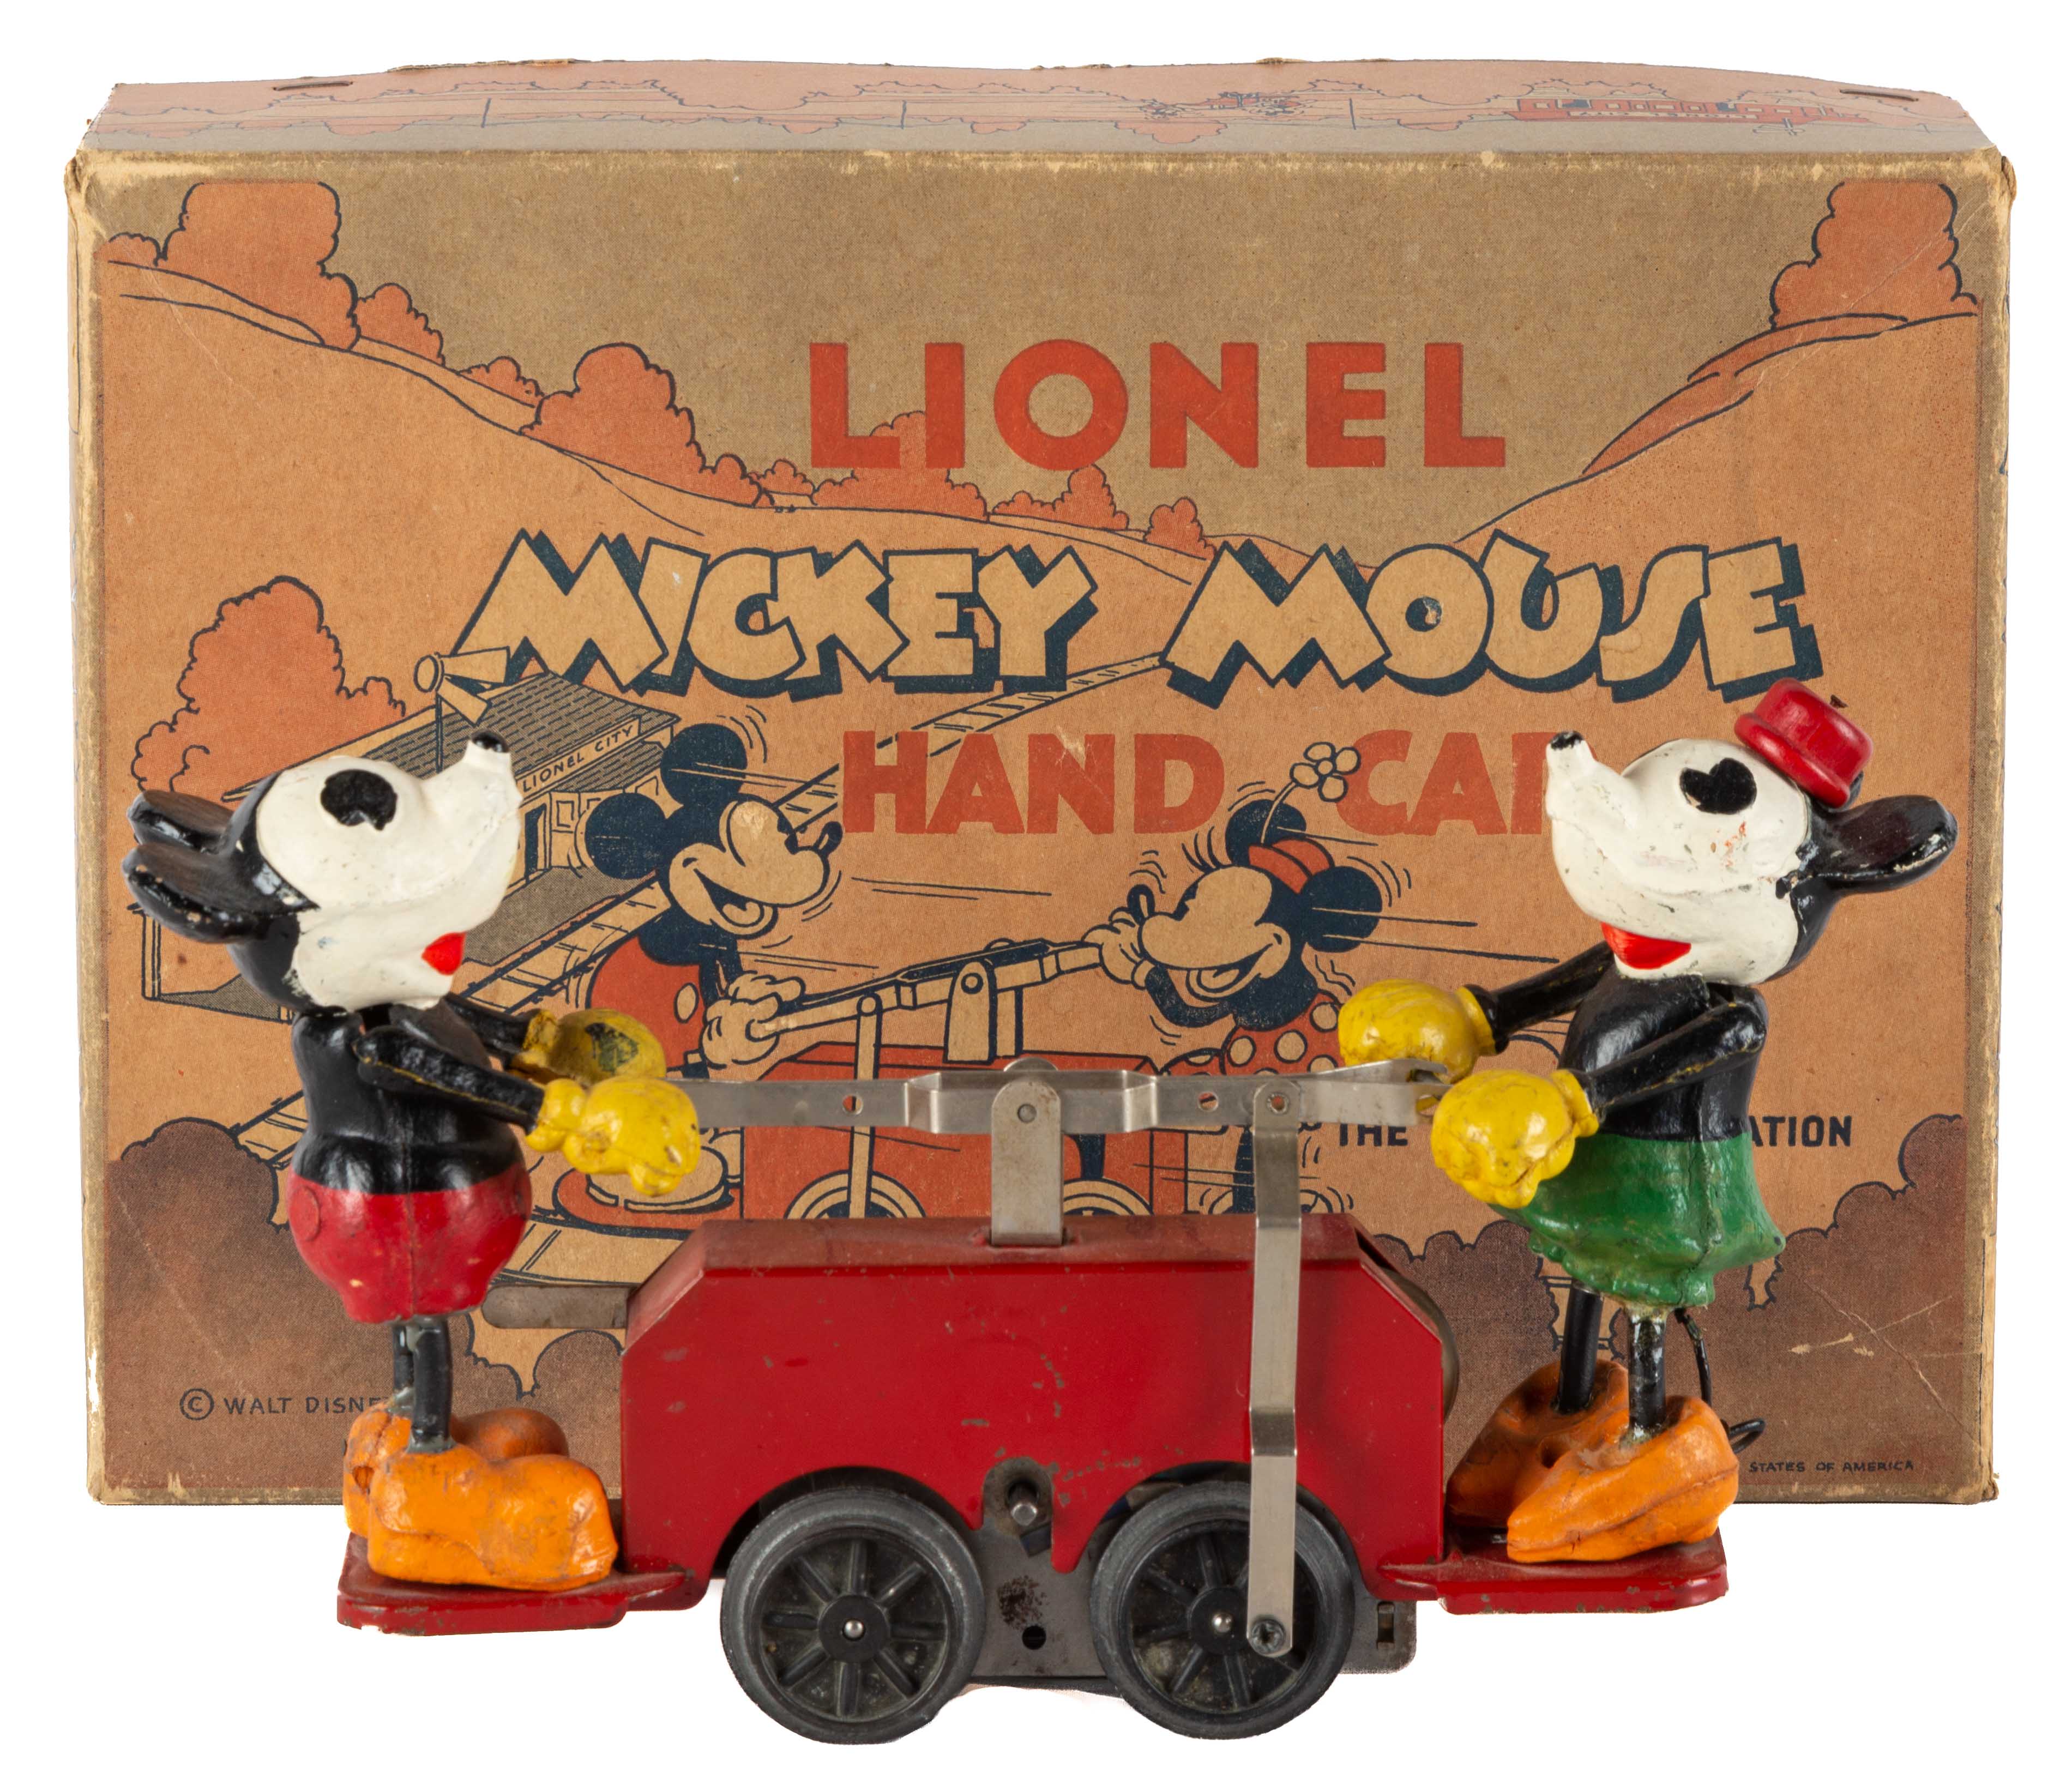 LIONEL MICKEY MOUSE HAND CAR with original